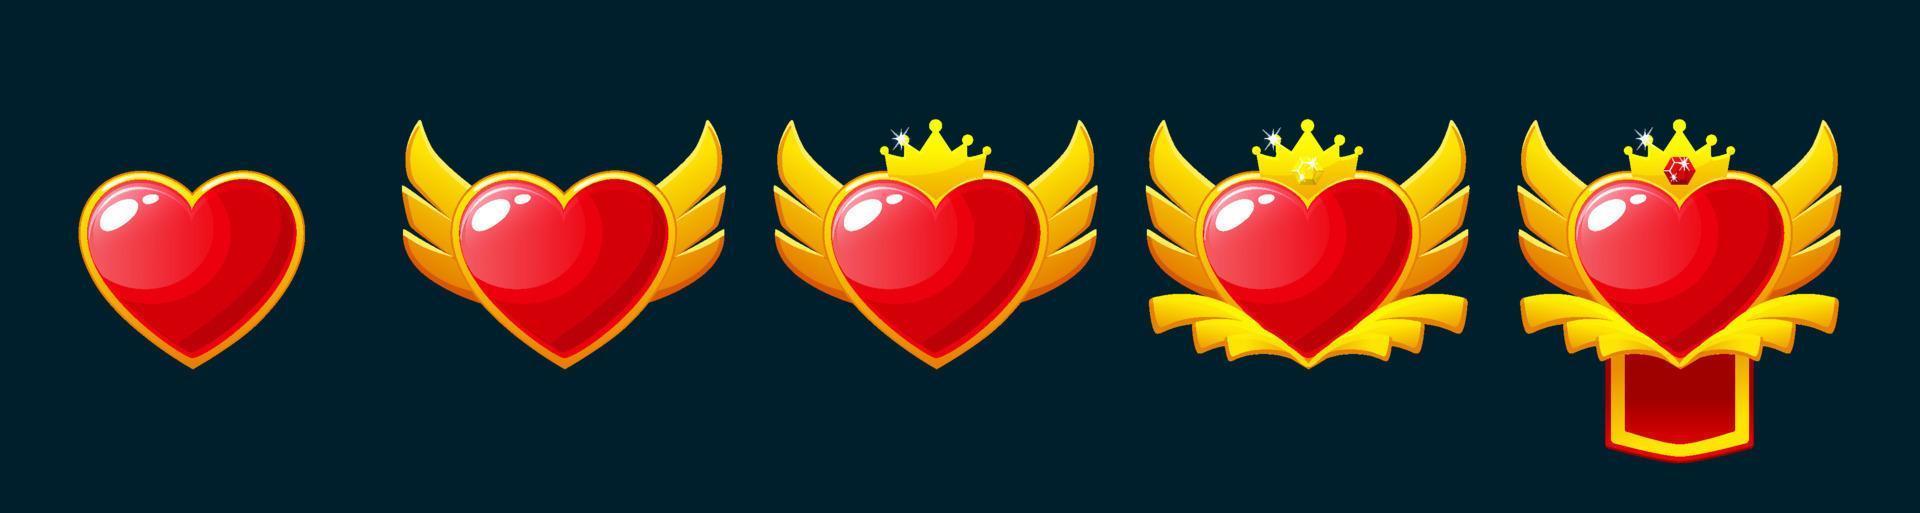 Set of Game Rank badges. Level up icons with Heart, ranking awards vector